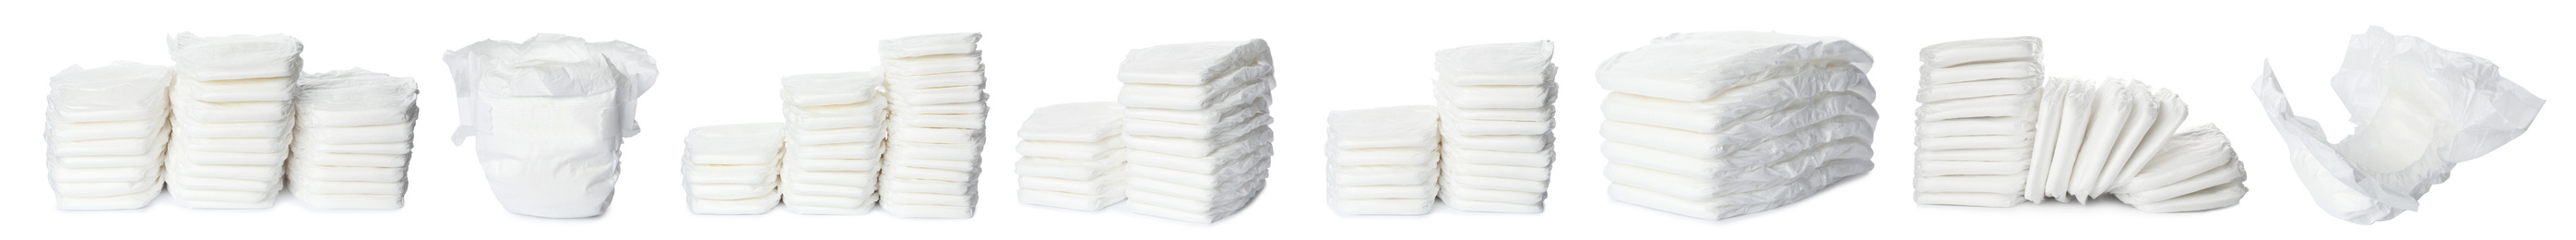 Image of Set of baby diapers on white background. Banner design